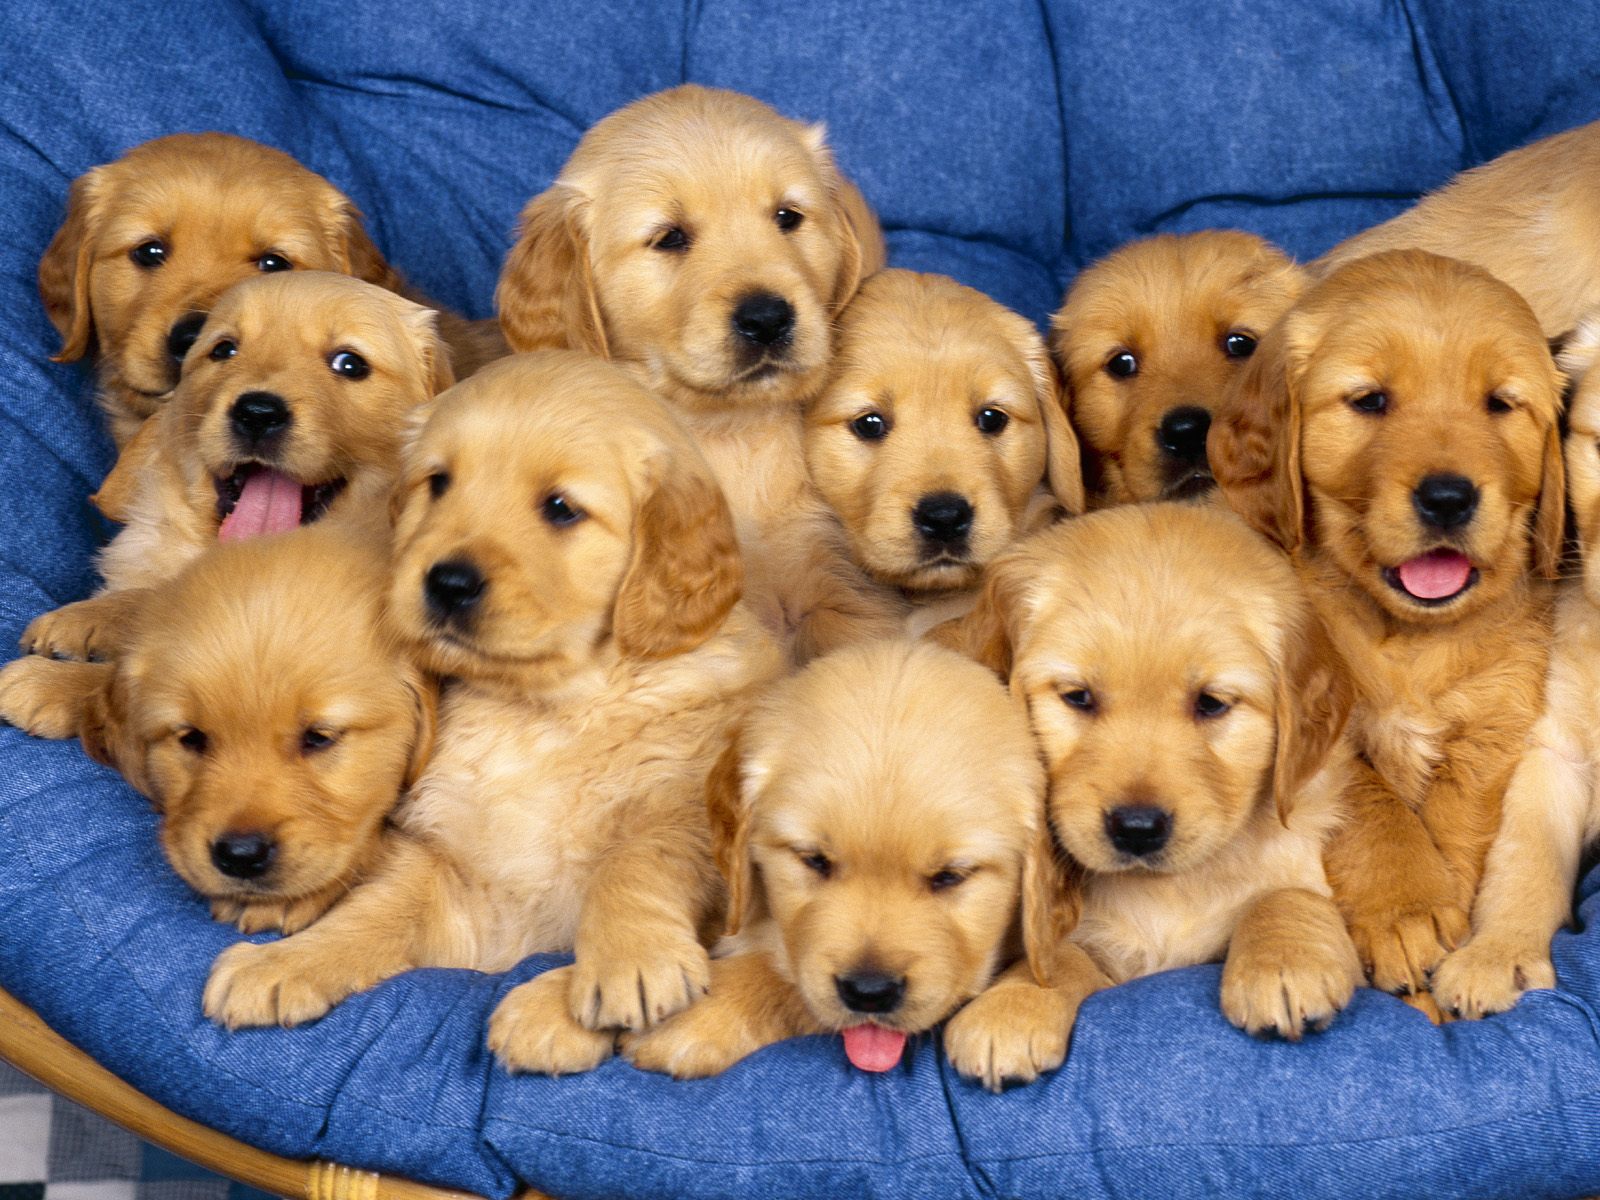 Puppy Dogs Hd Desktop Images Wallpapers Hasnat wallpapers 1600x1200